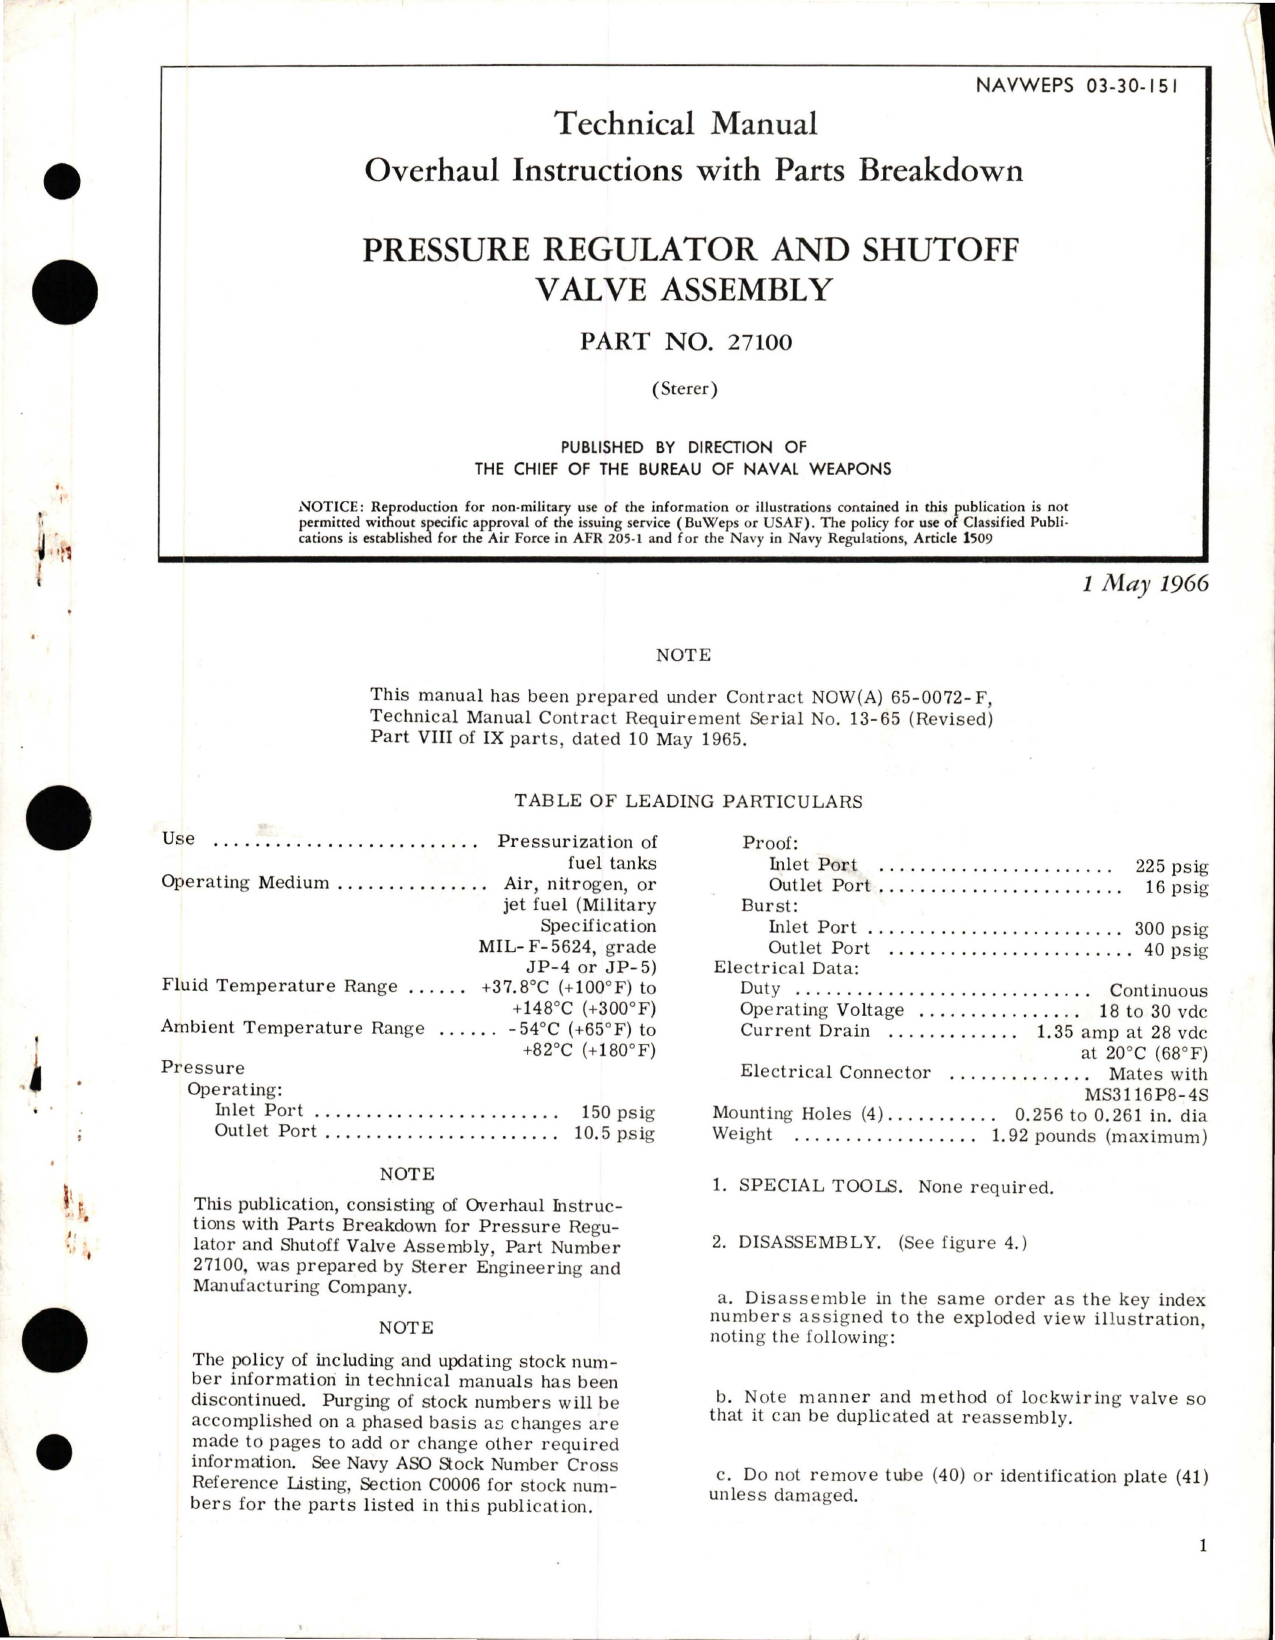 Sample page 1 from AirCorps Library document: Overhaul Instructions with Parts Breakdown for Pressure Regulator & Shutoff Valve Assembly - Part 27100